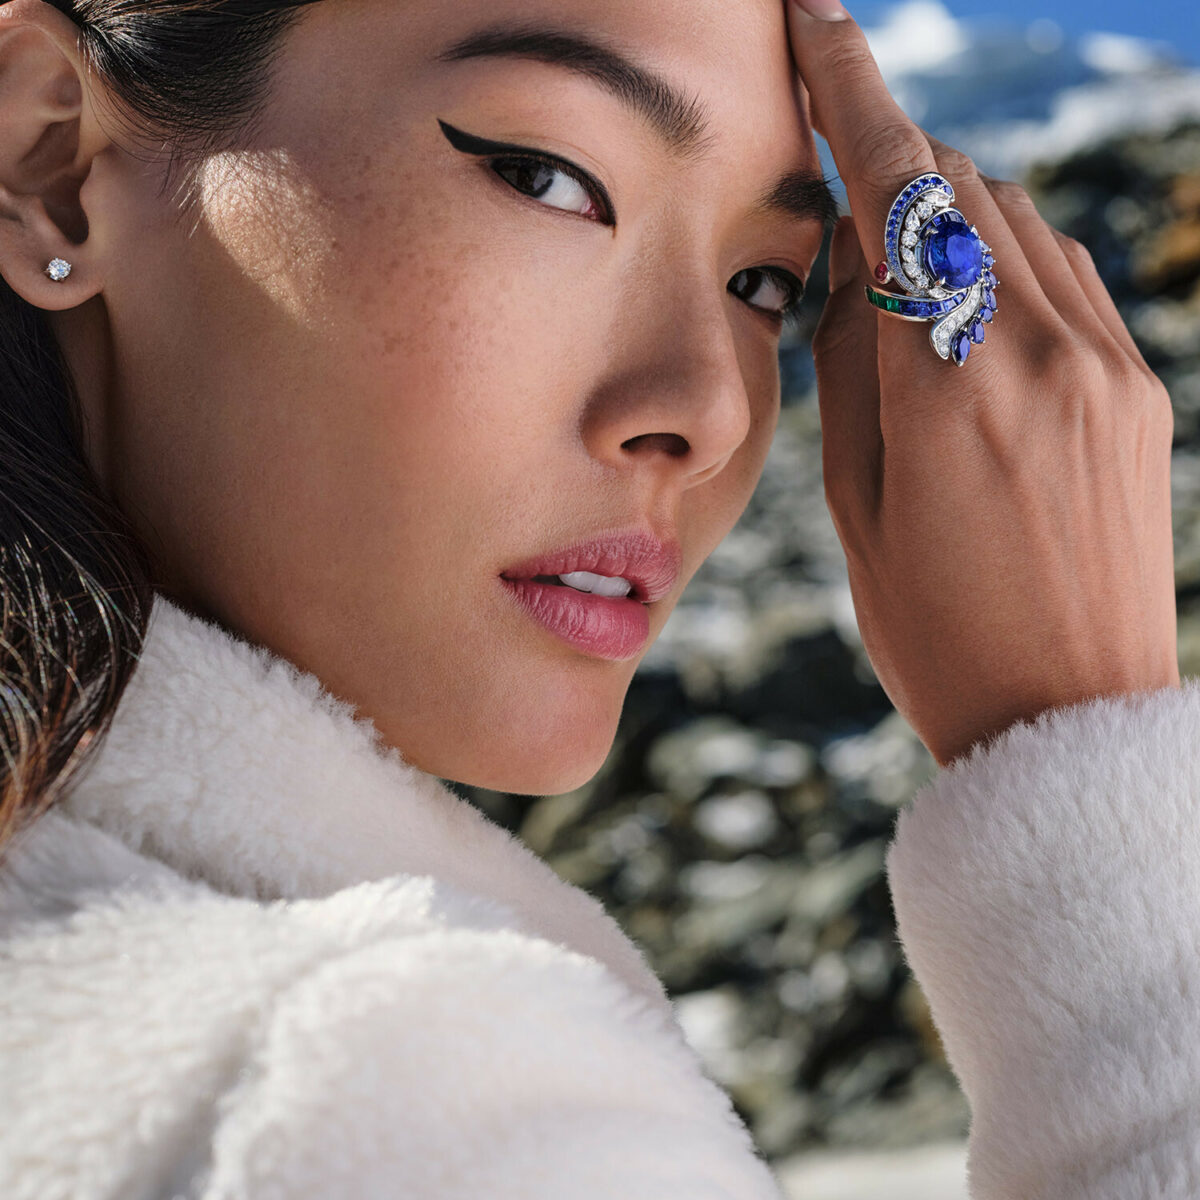 Model wearing a sapphire and diamond ring